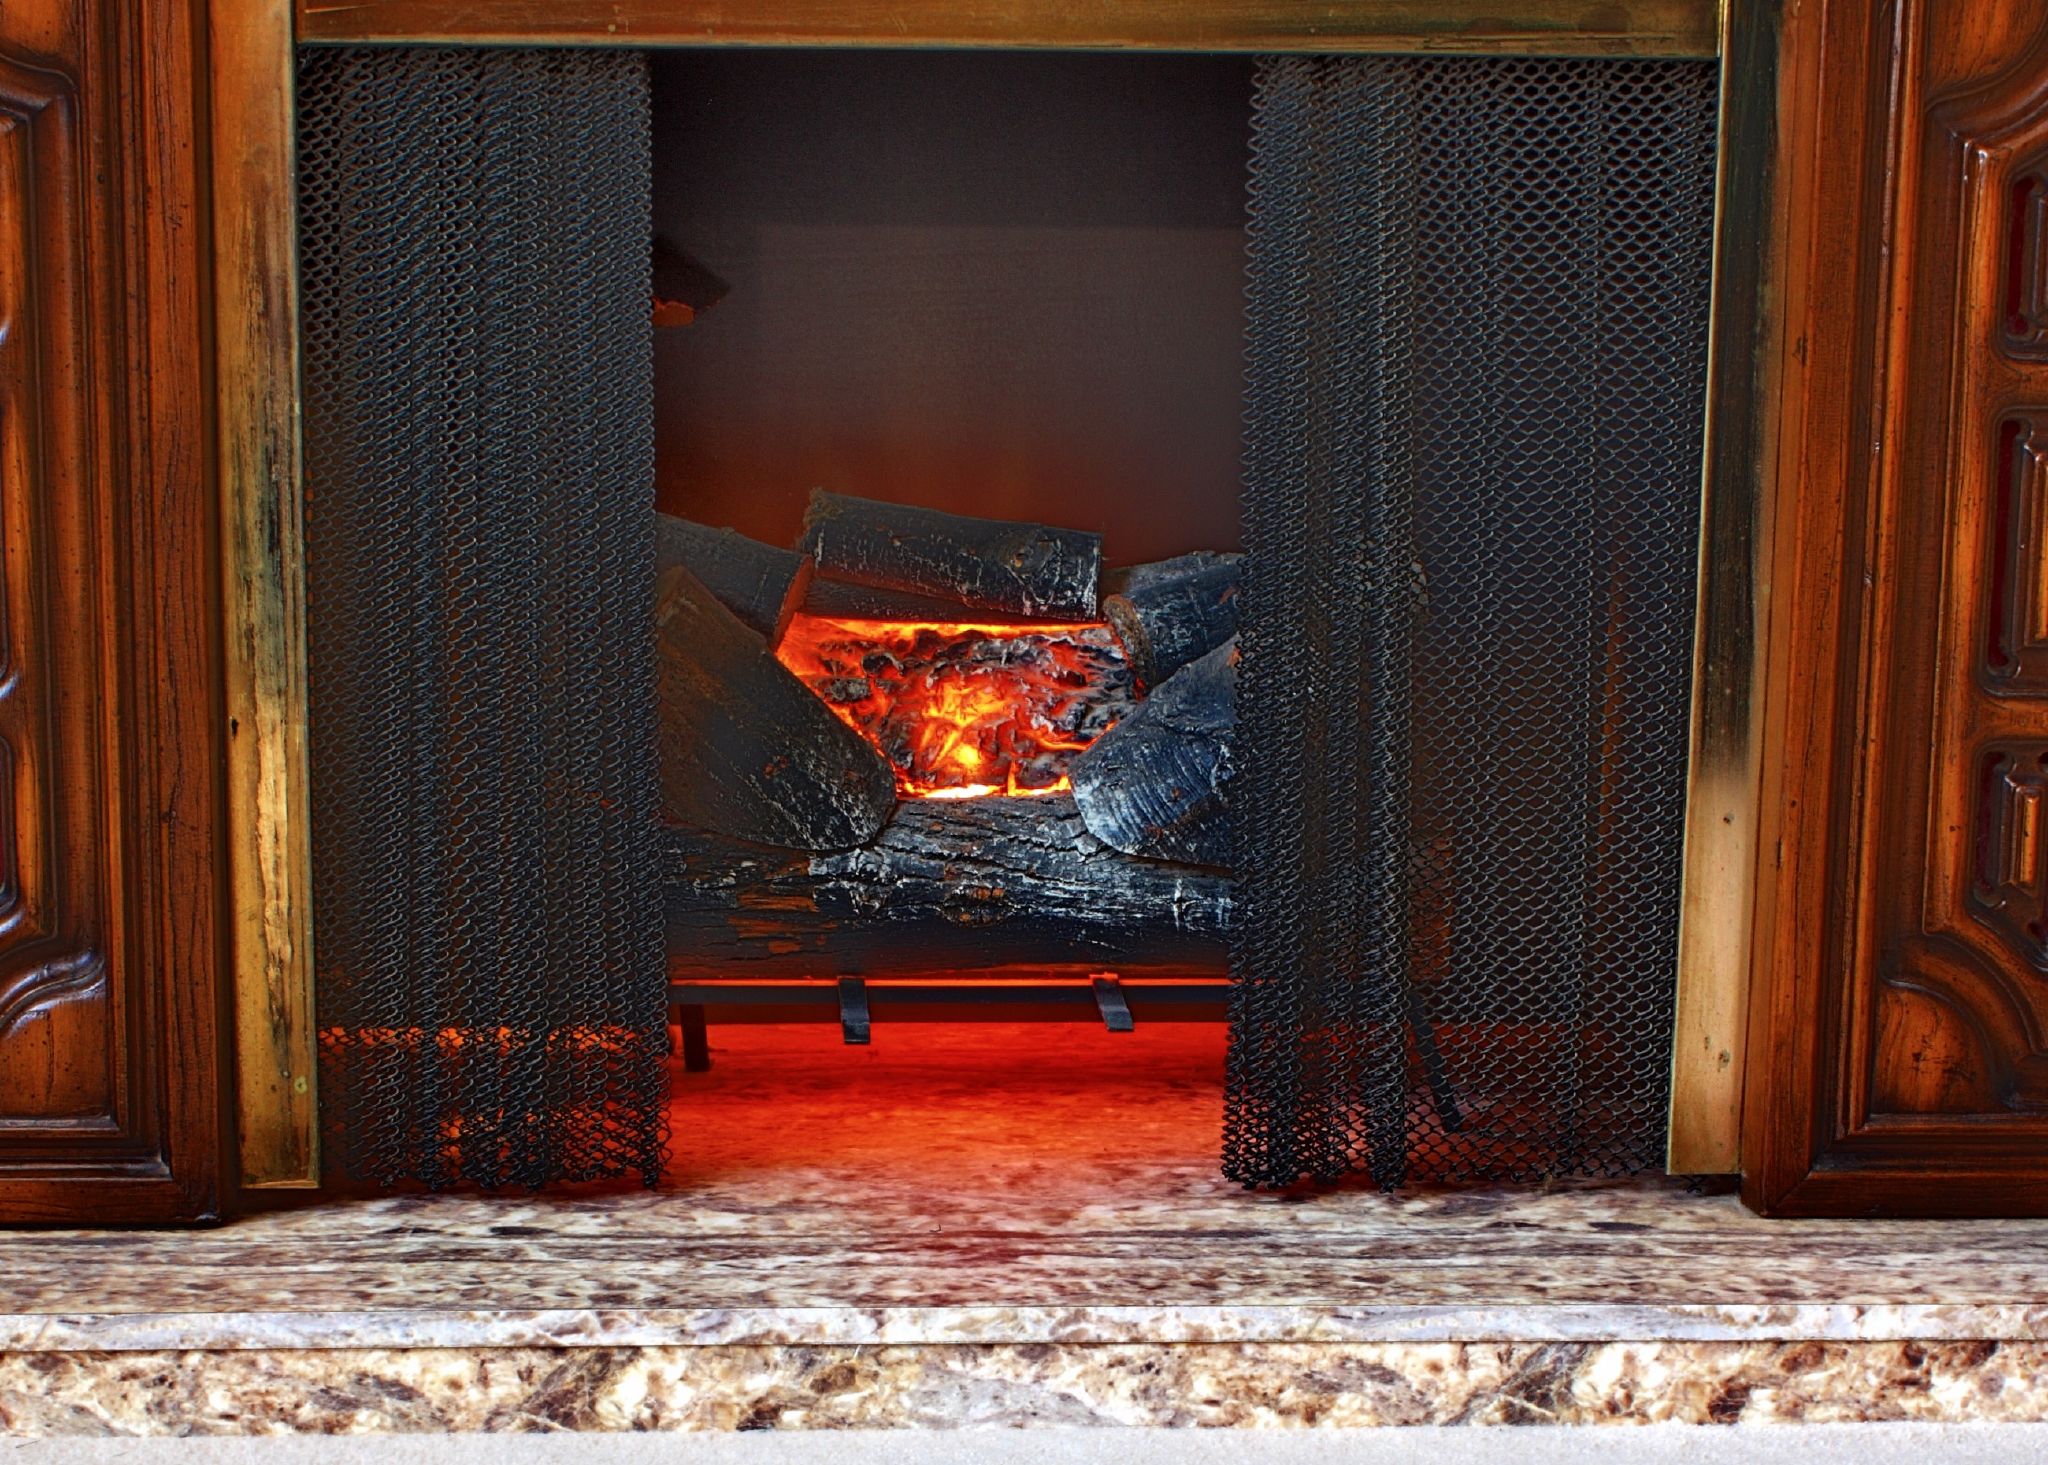 a fireplace is lit with red fire and lots of black mesh